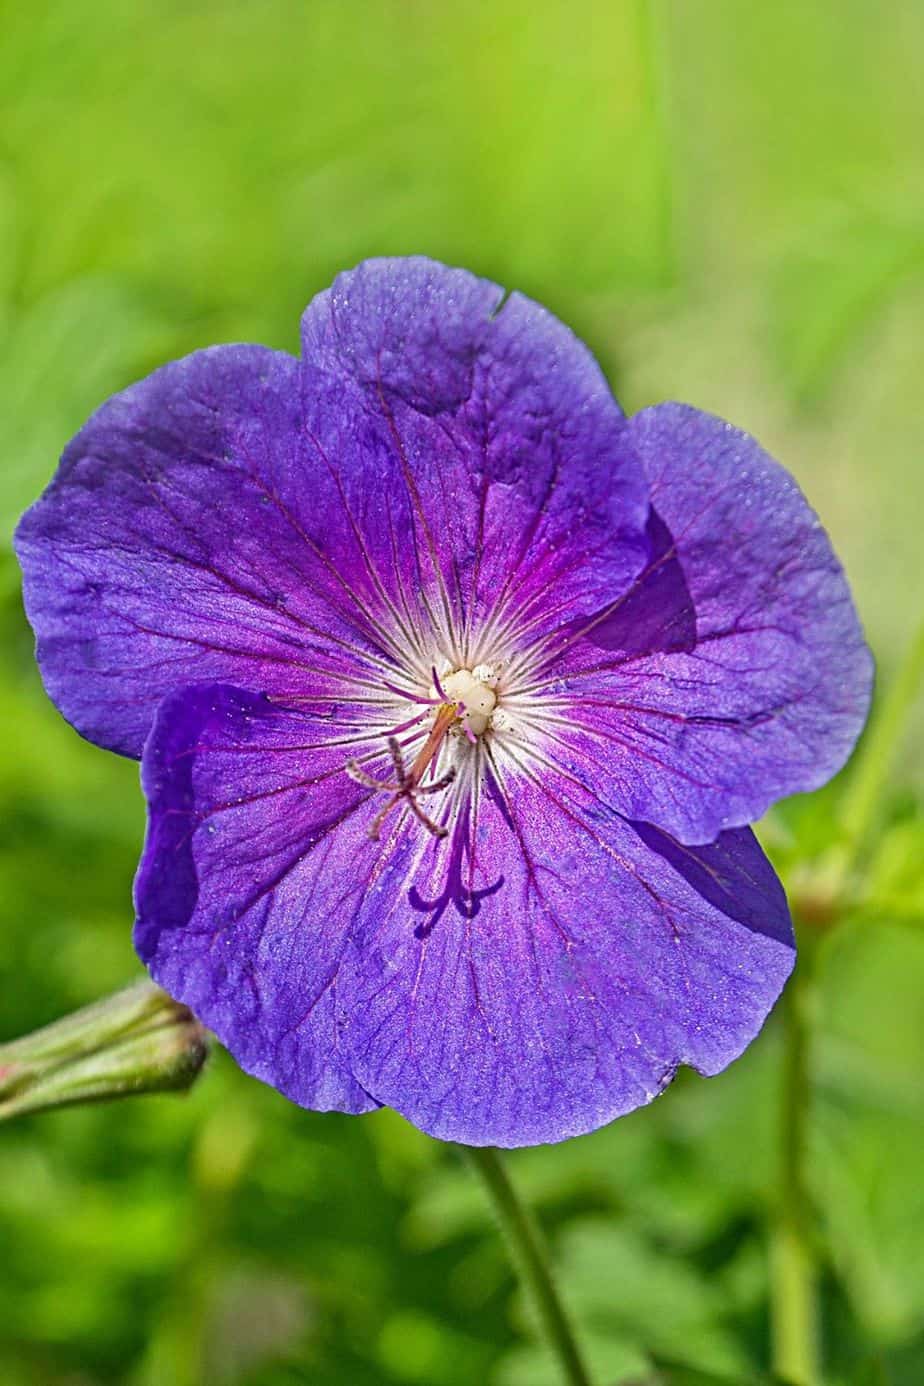 Johnson's Blue Geranium grows large lavender-colored blooms that adds a pop of color to your southeast facing garden